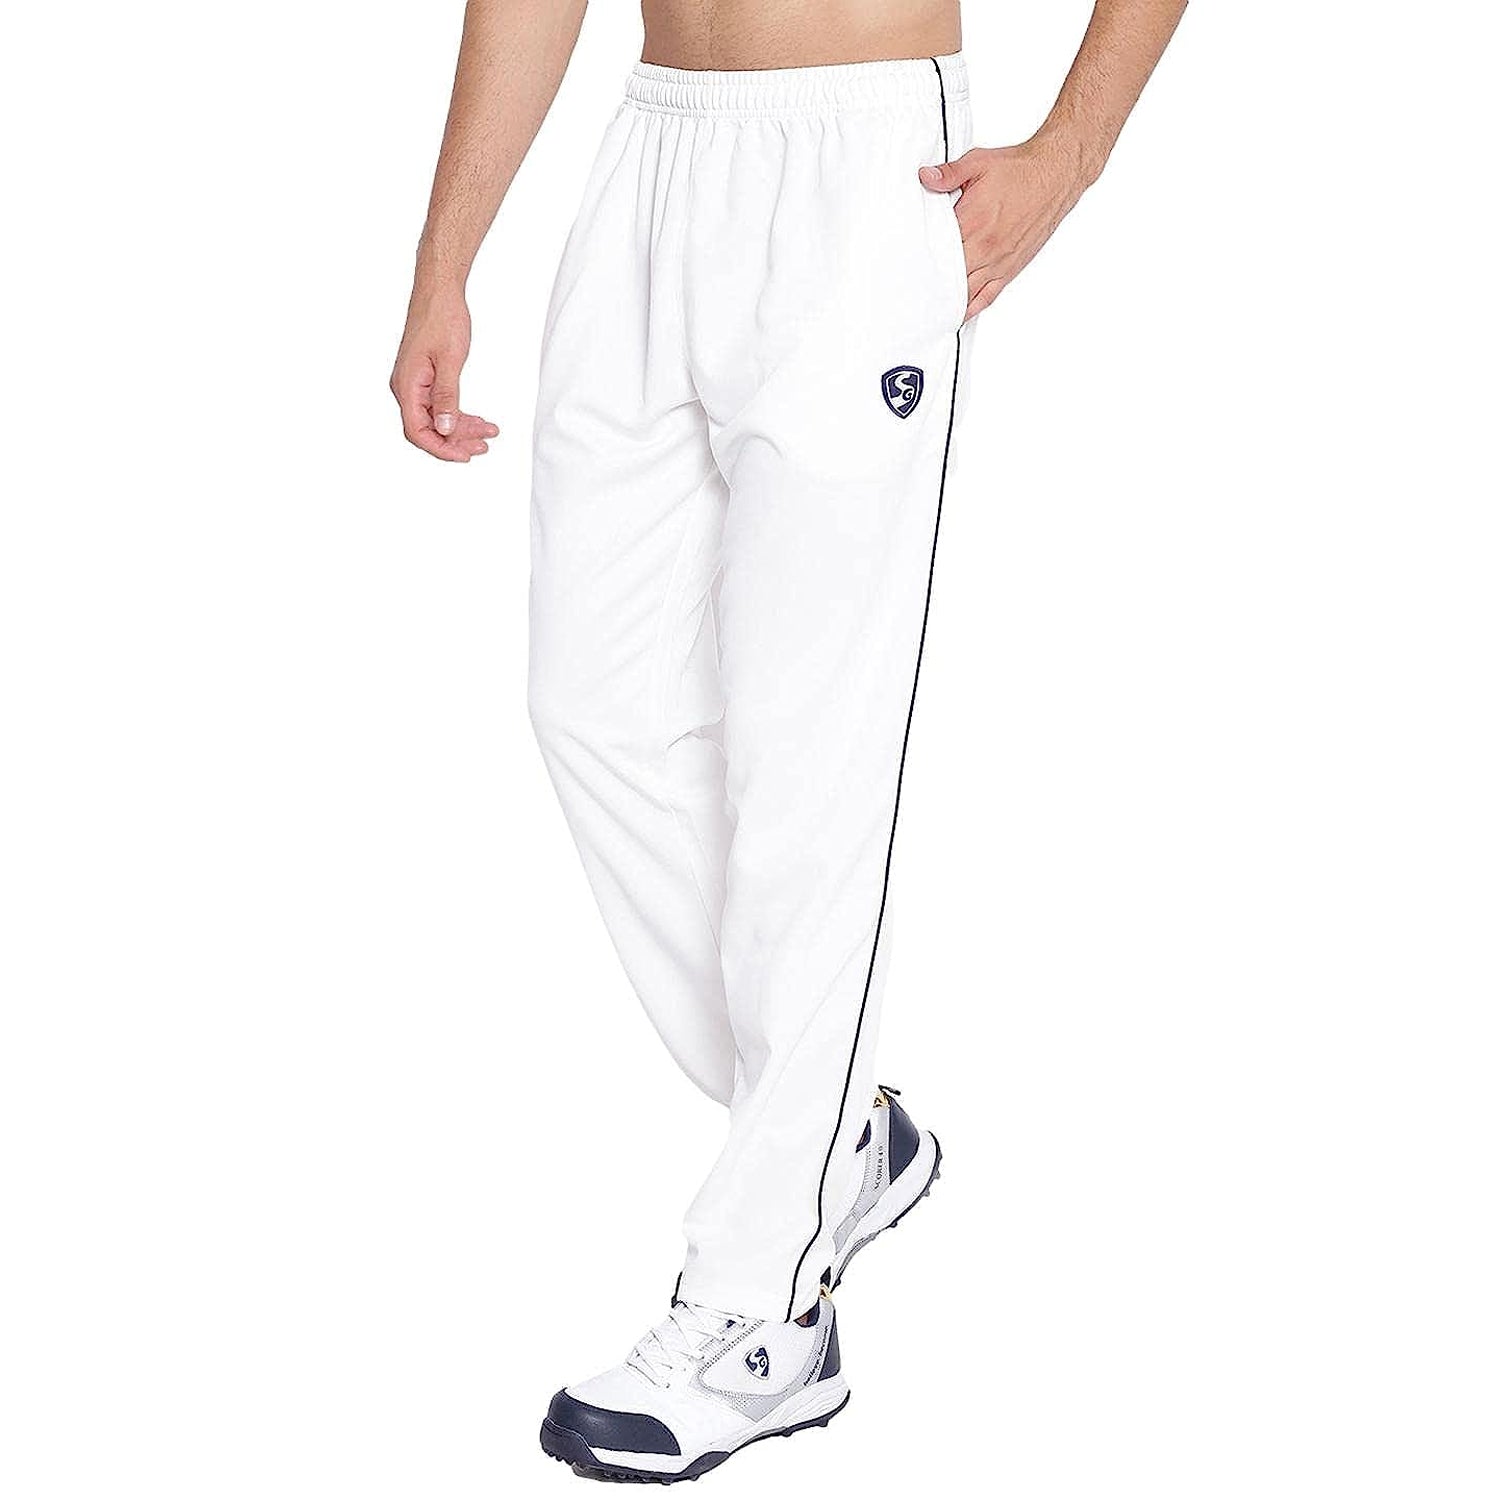 Cricket Track Pants Online Shopping  Arjun Series from Omtex